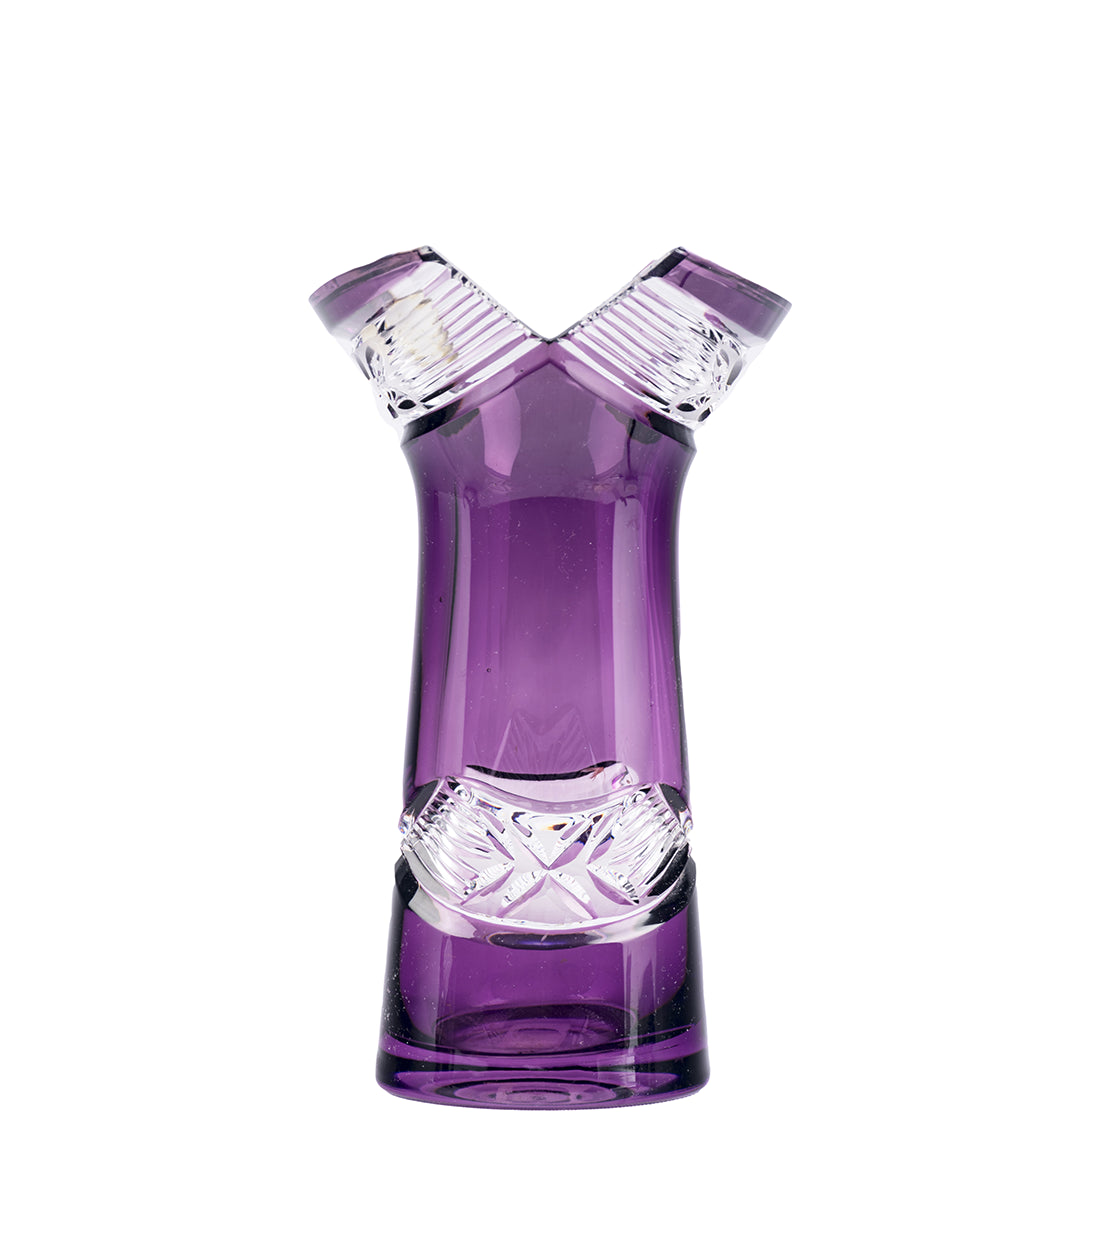 CAESAR CRYSTAL BOHEMIAE - Lavender Fusion - A high-quality sleek vase to embellish your space.